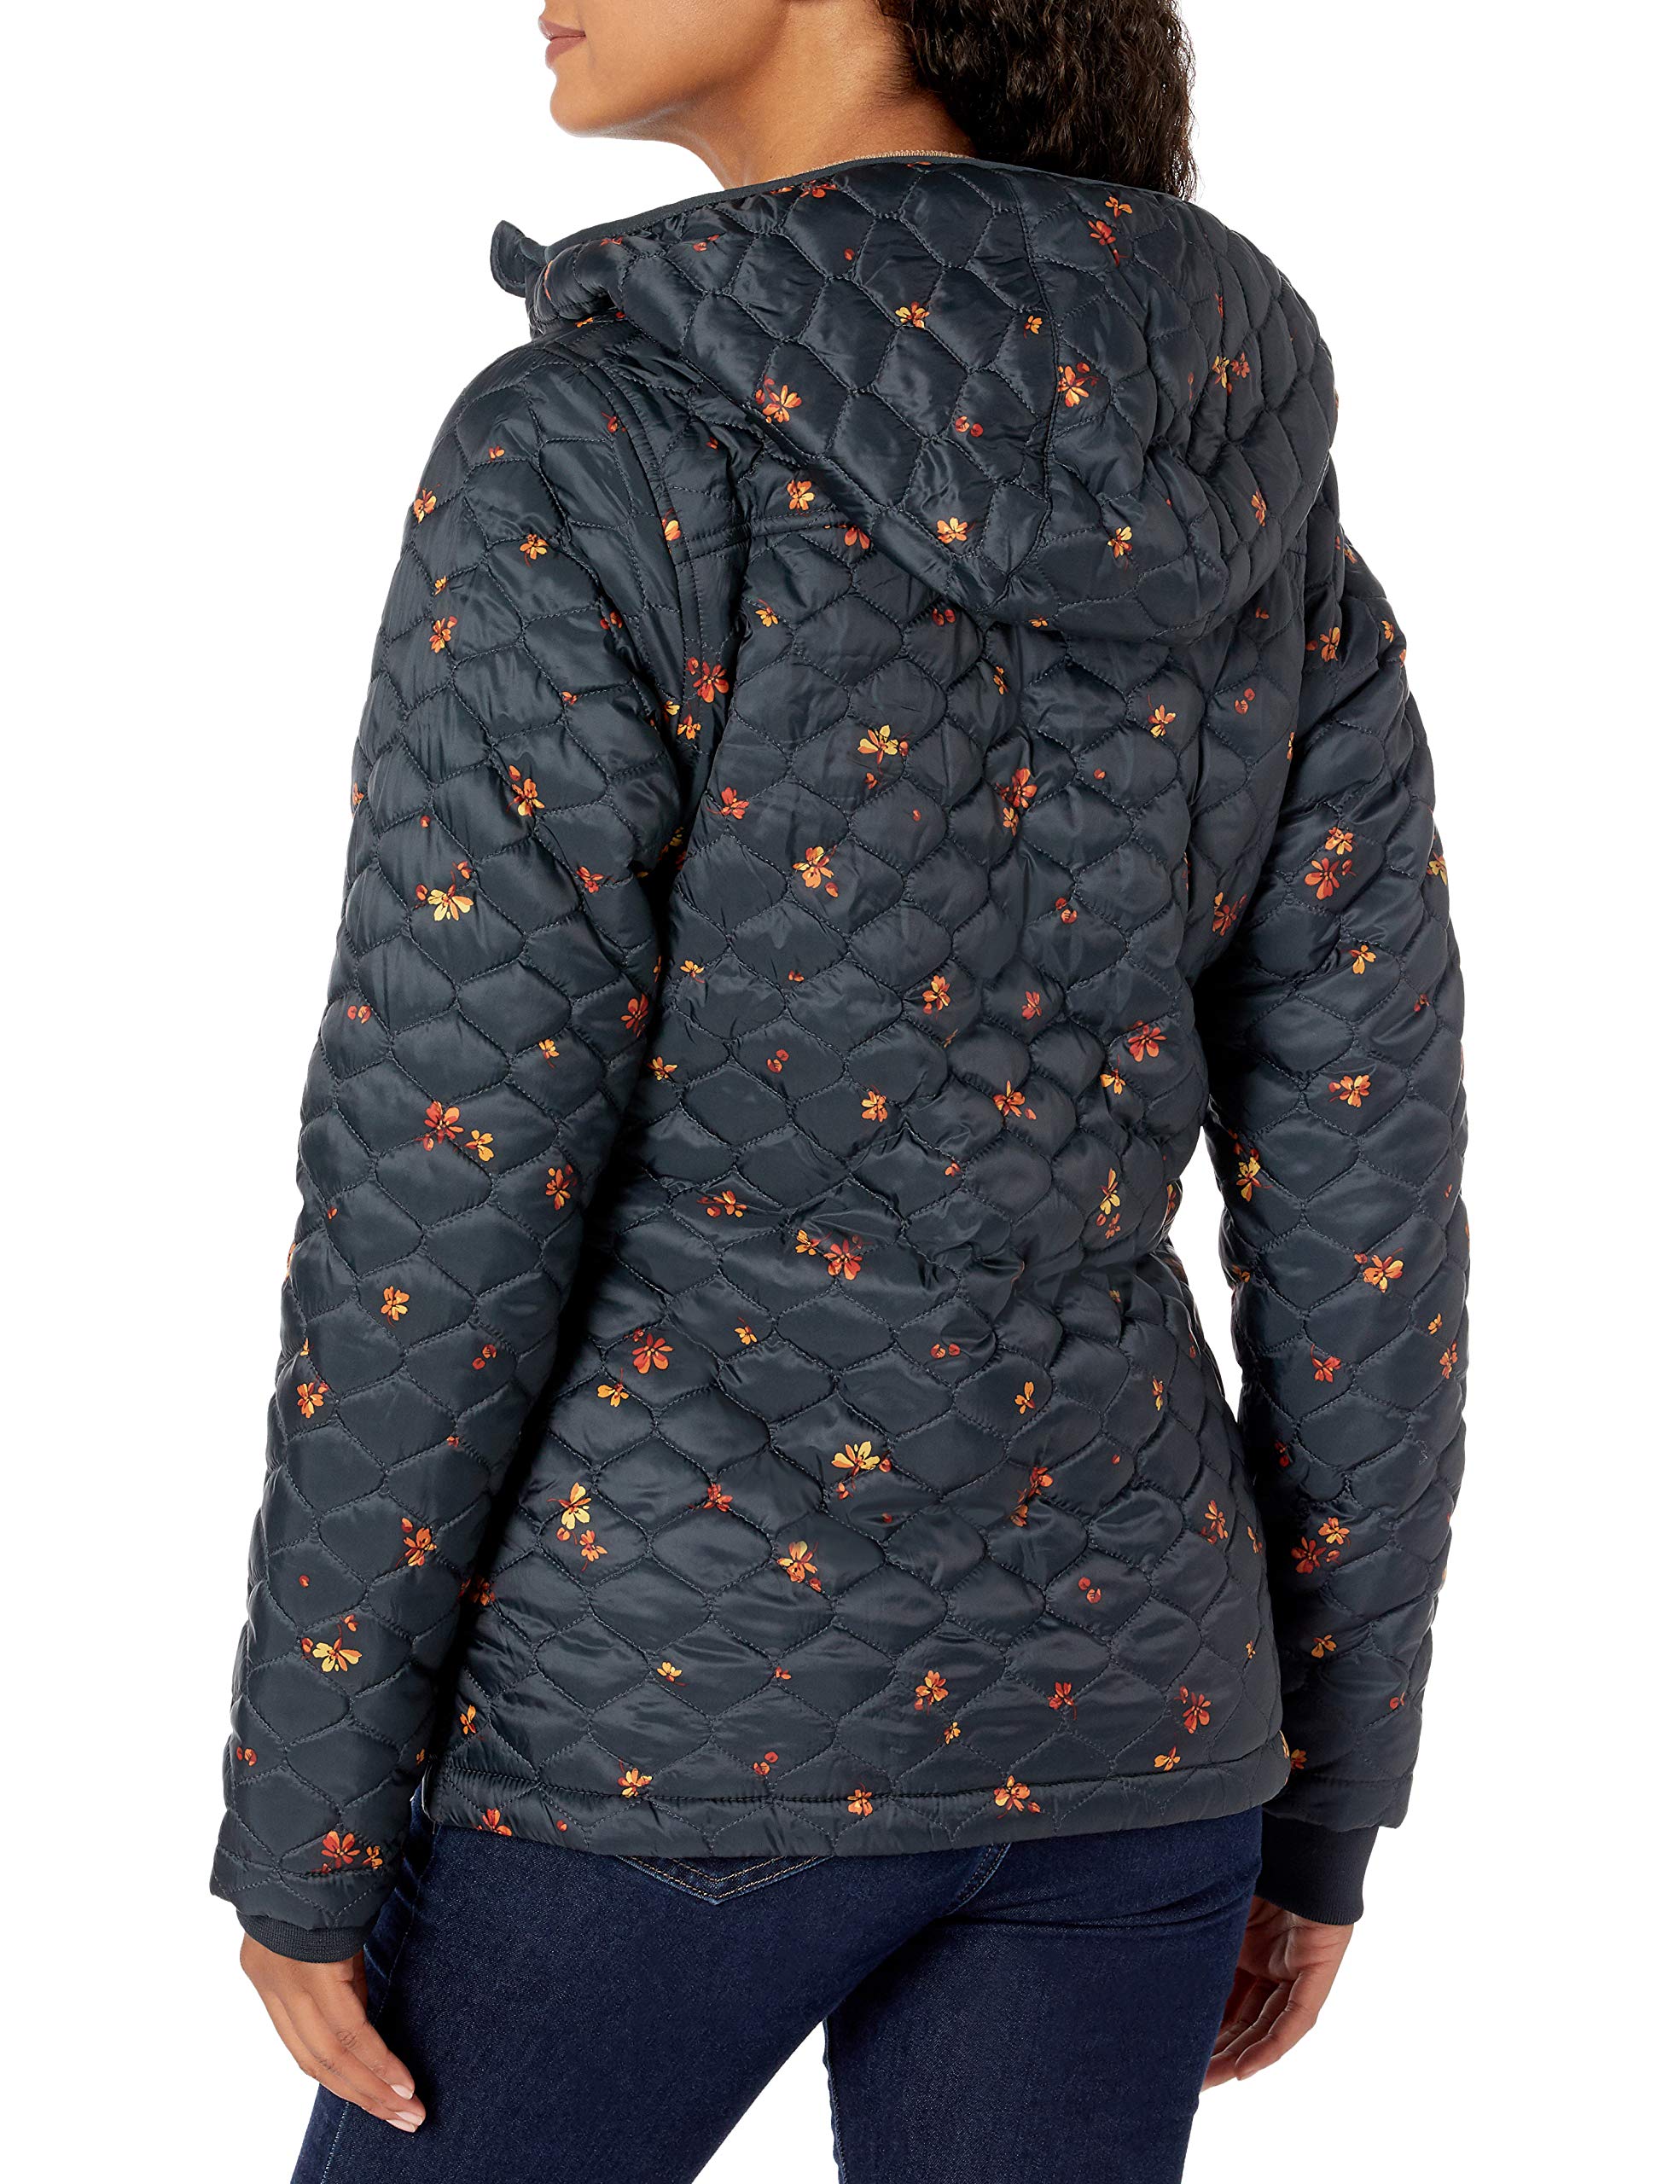 Amazon Essentials Women's Lightweight Water-Resistant Sherpa-Lined Hooded Puffer